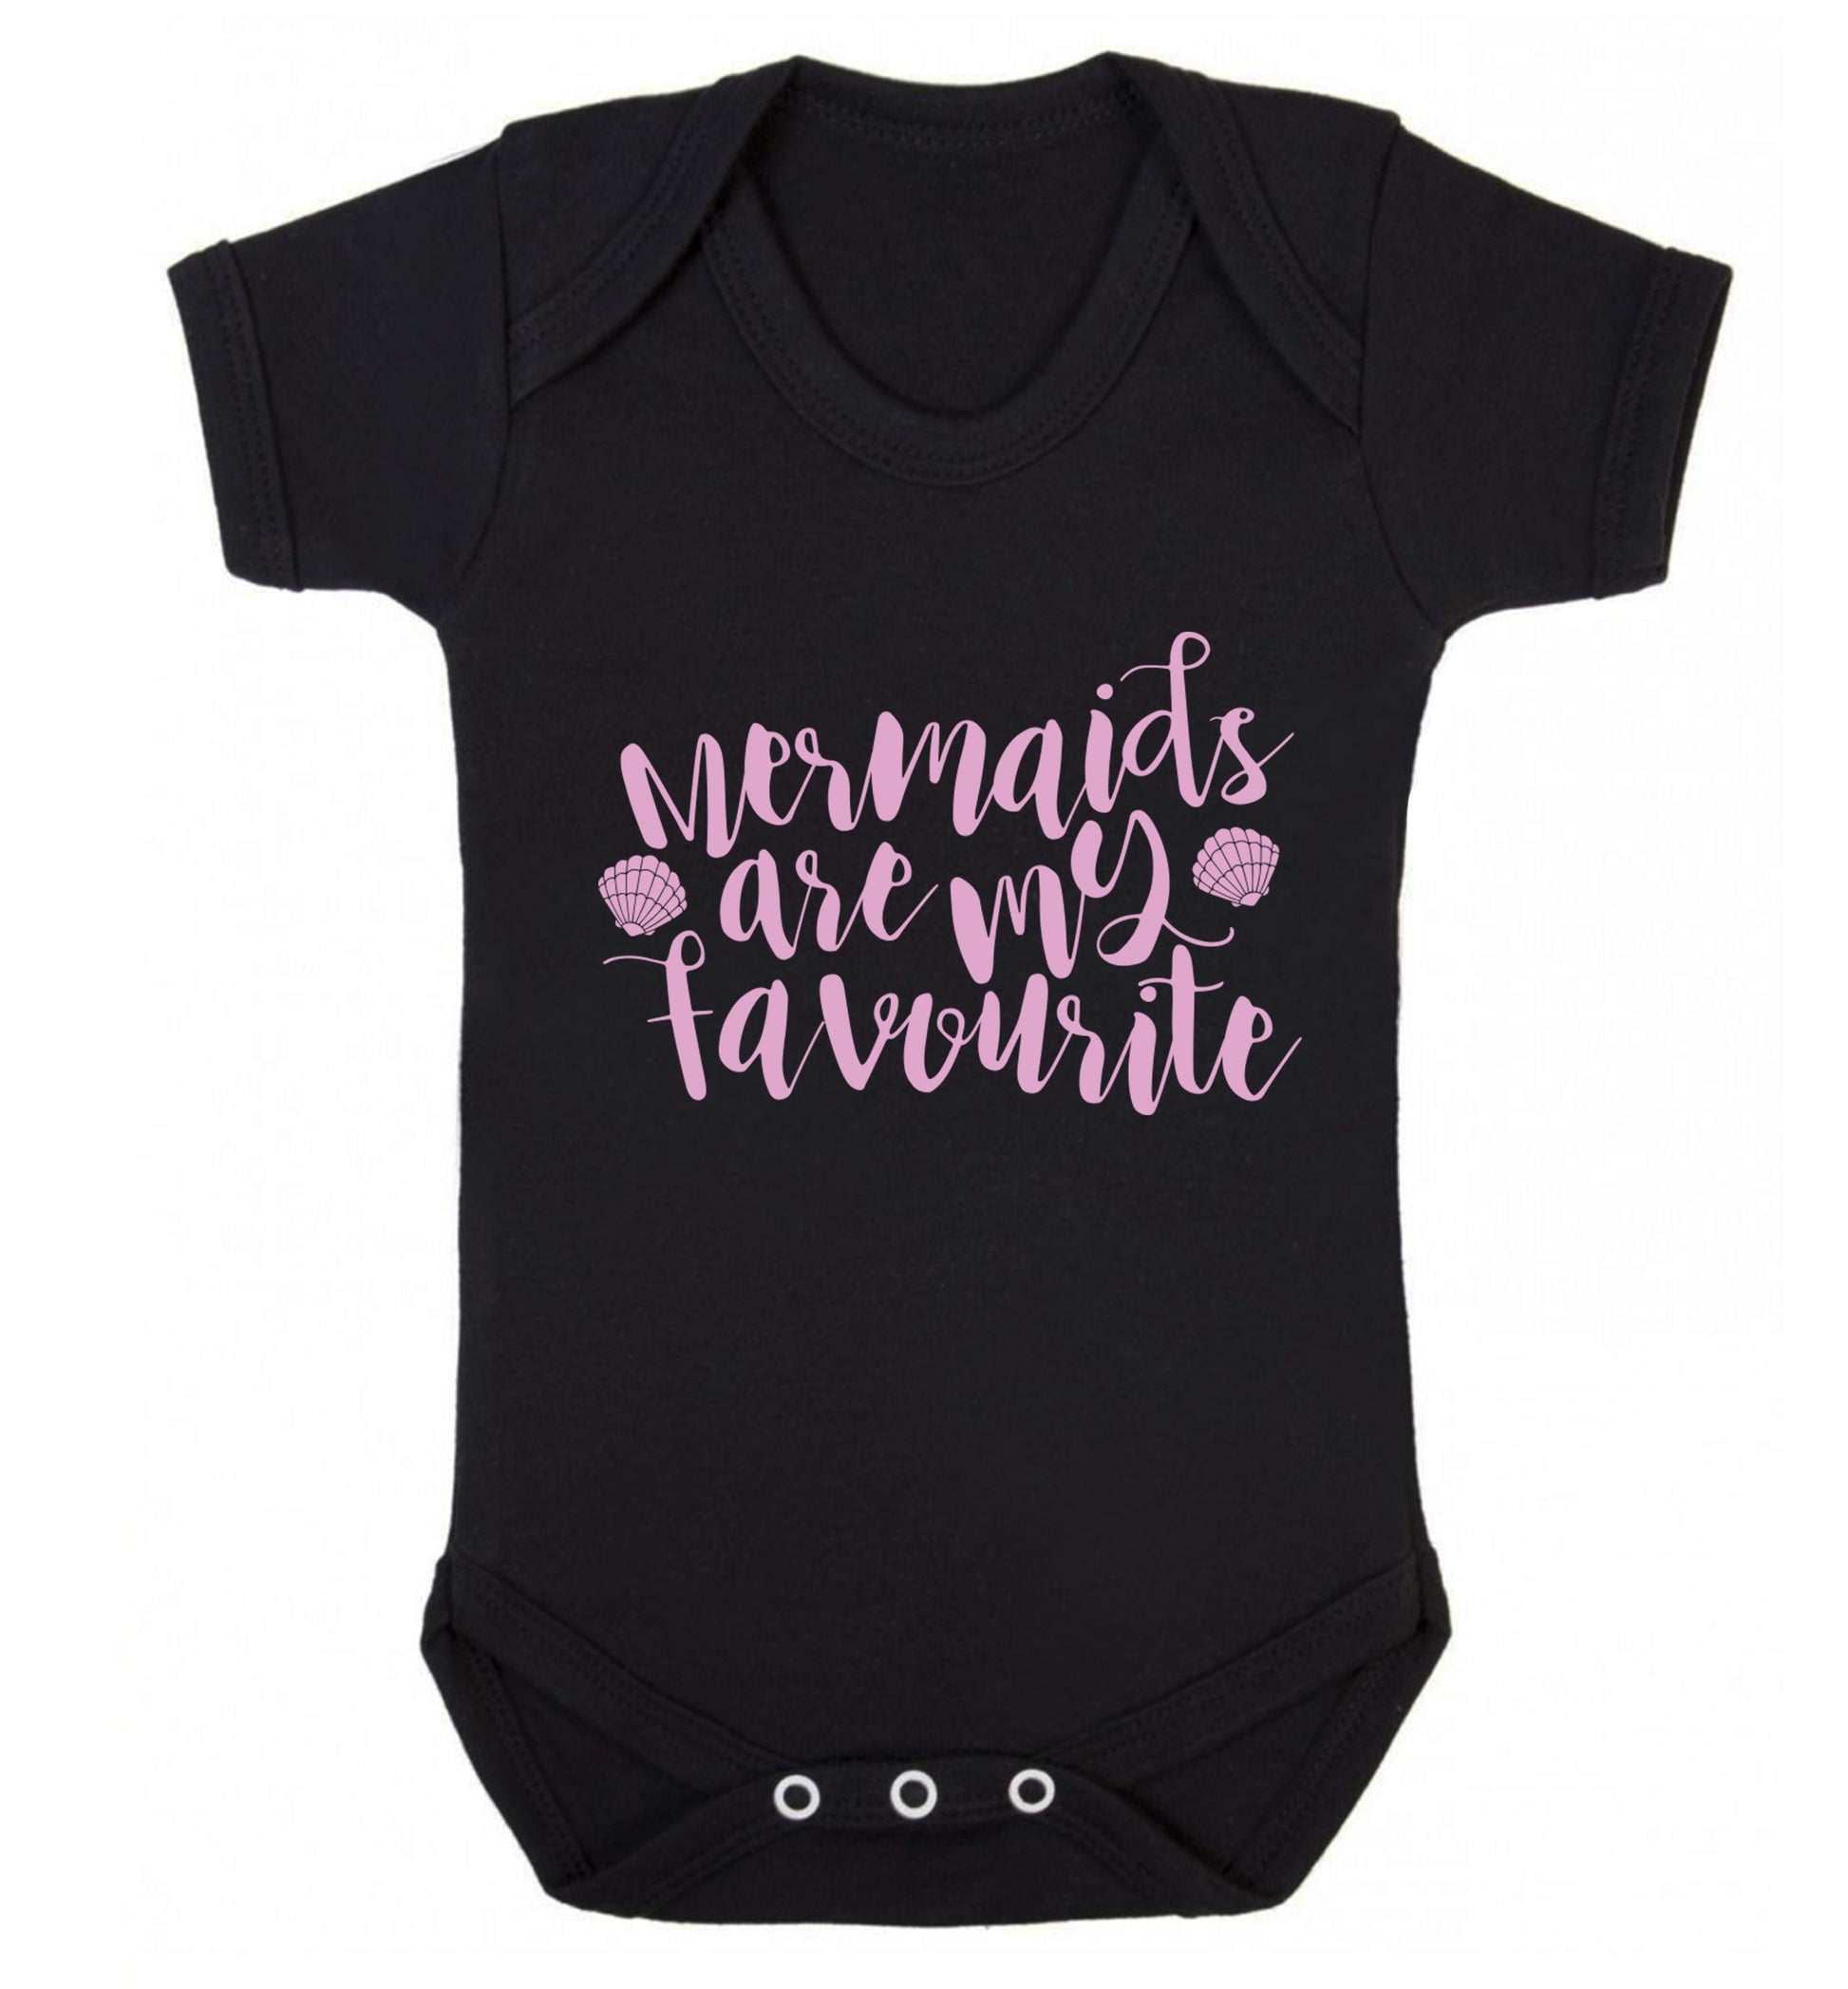 Mermaids are my favourite Baby Vest black 18-24 months